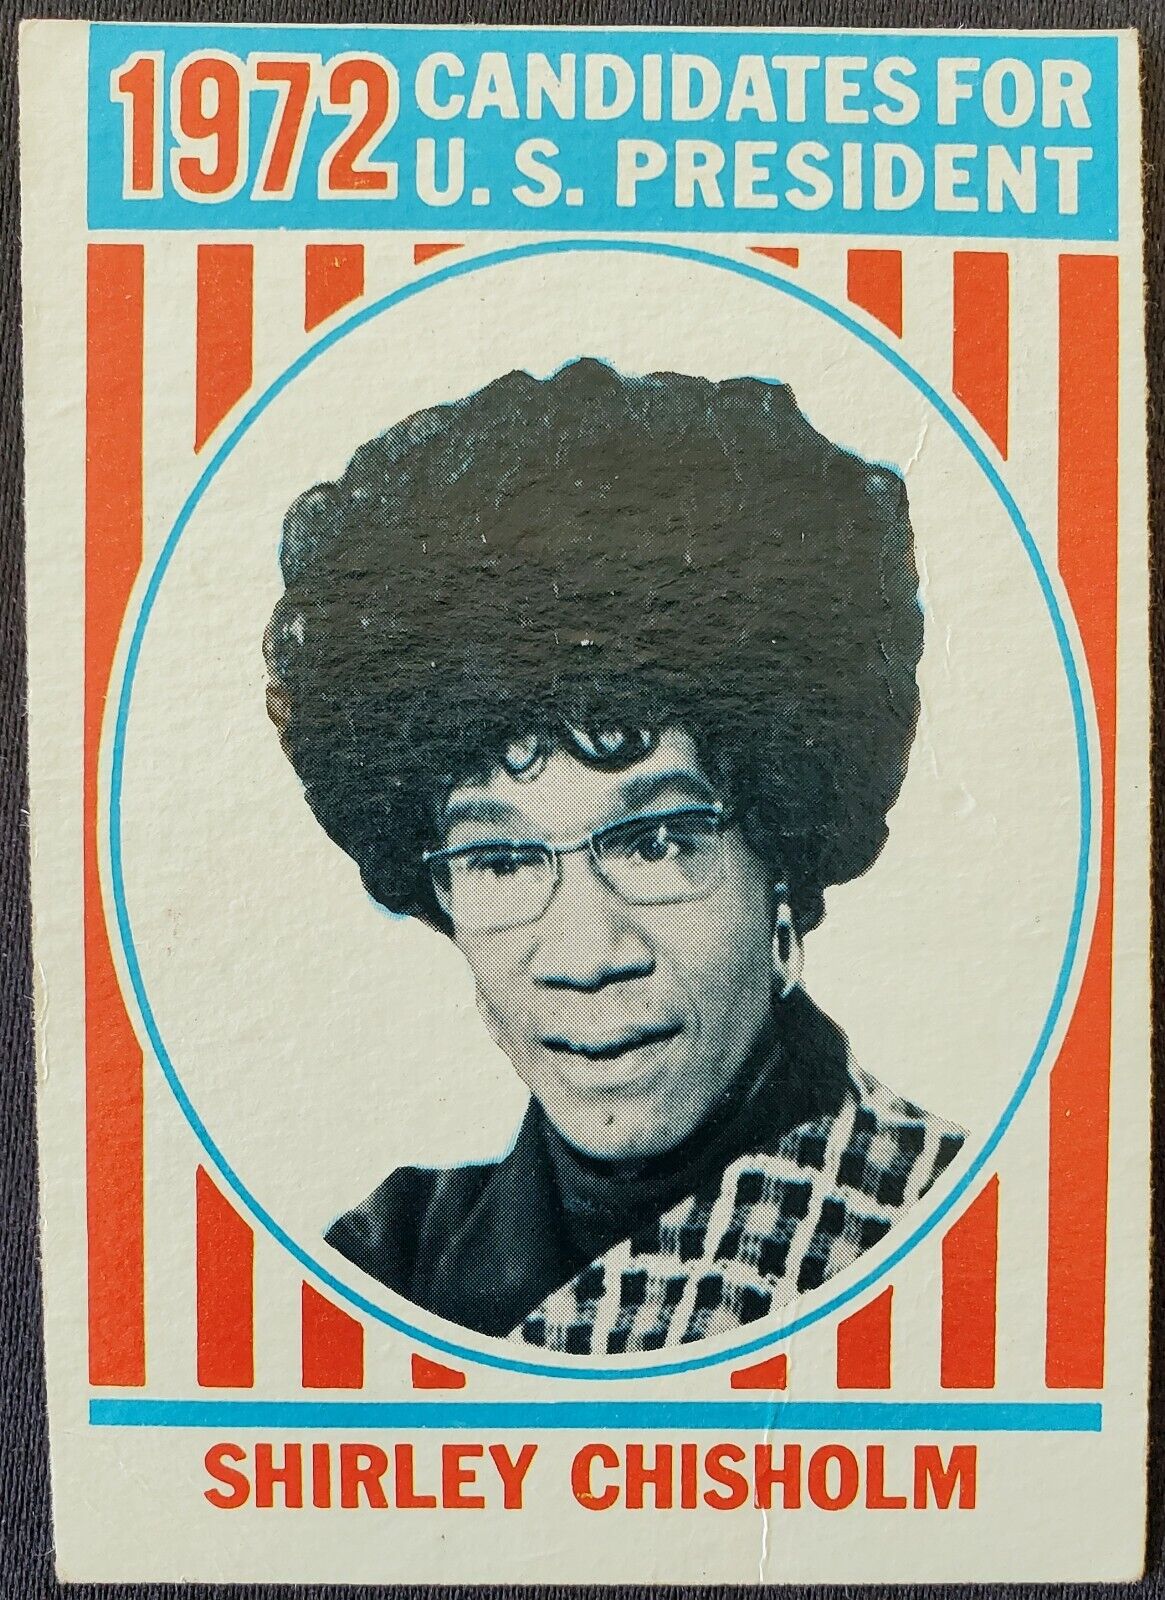 1972 Shirley Chisholm US Presidential Election Card #37 New York